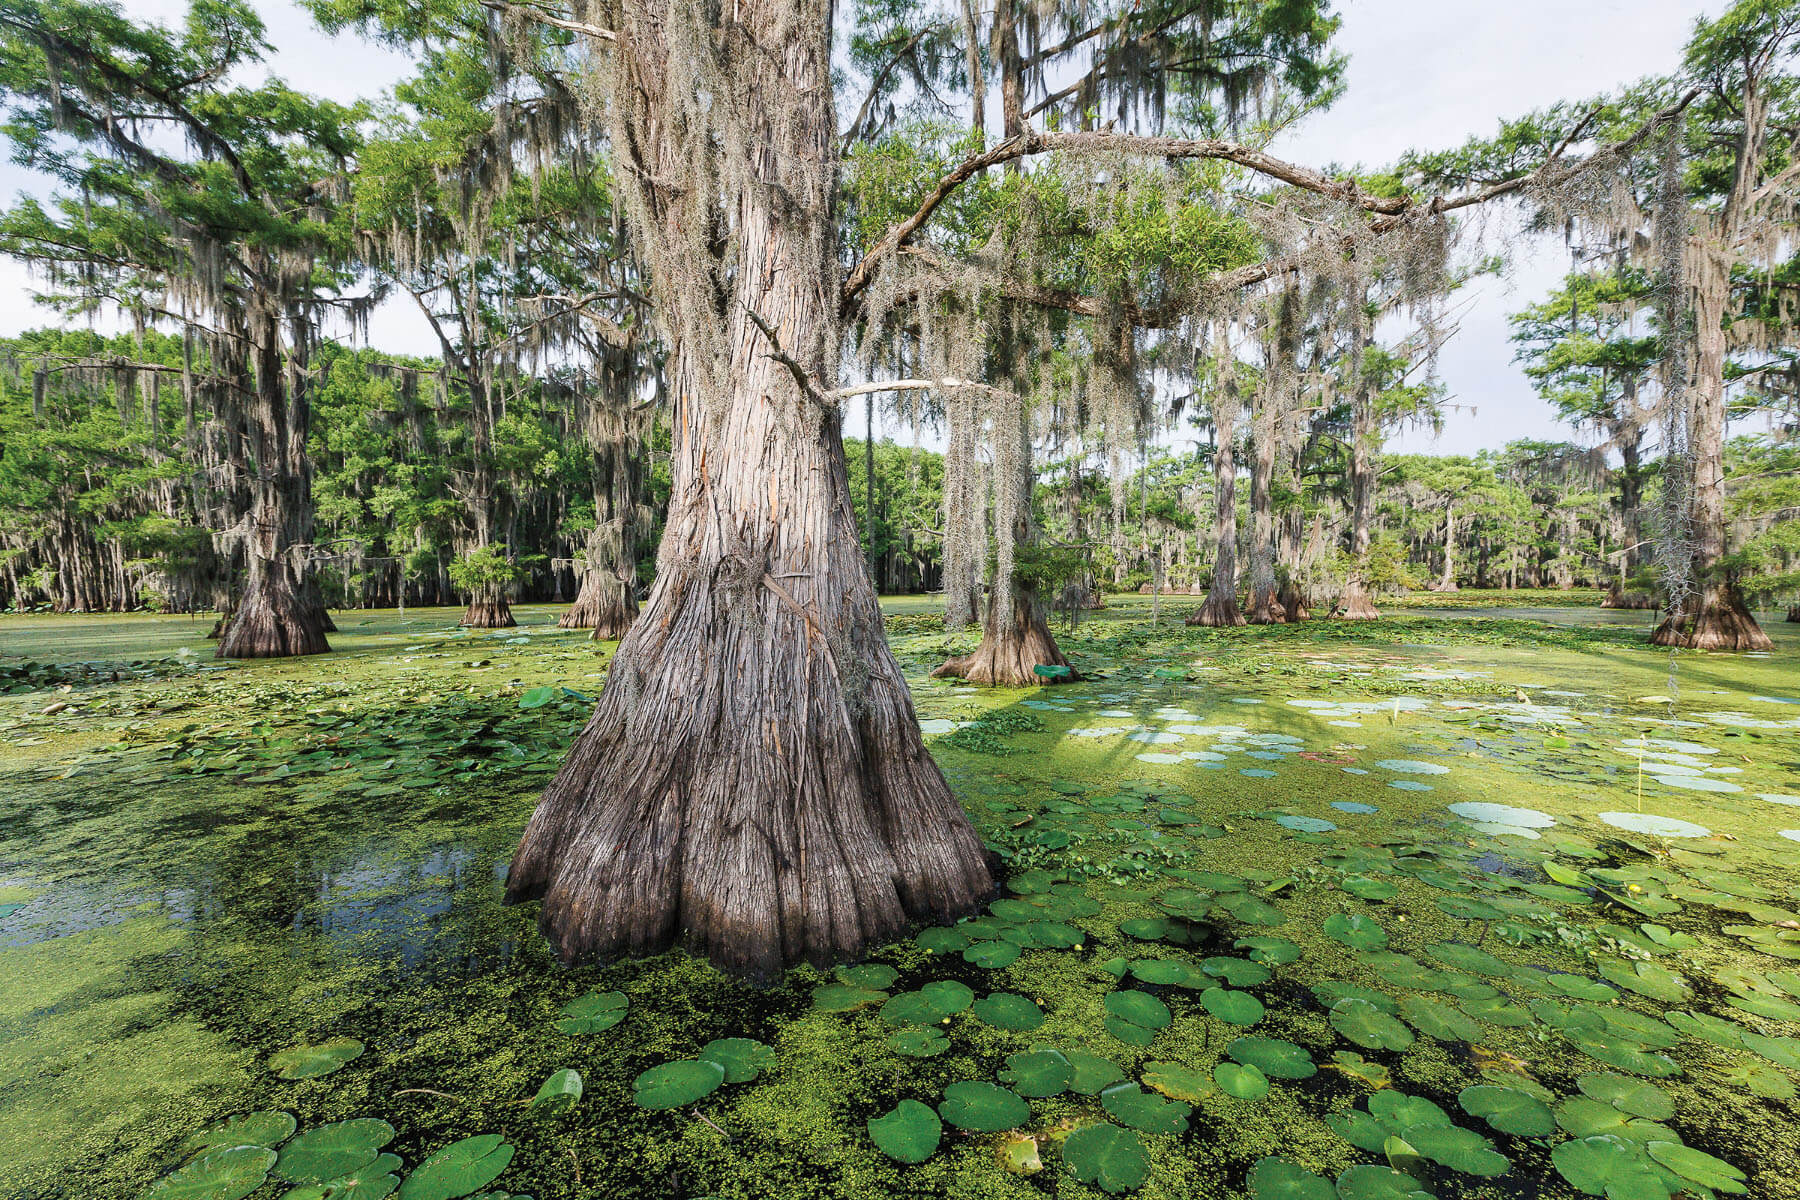 Tall trees grow out of water filled with green plants